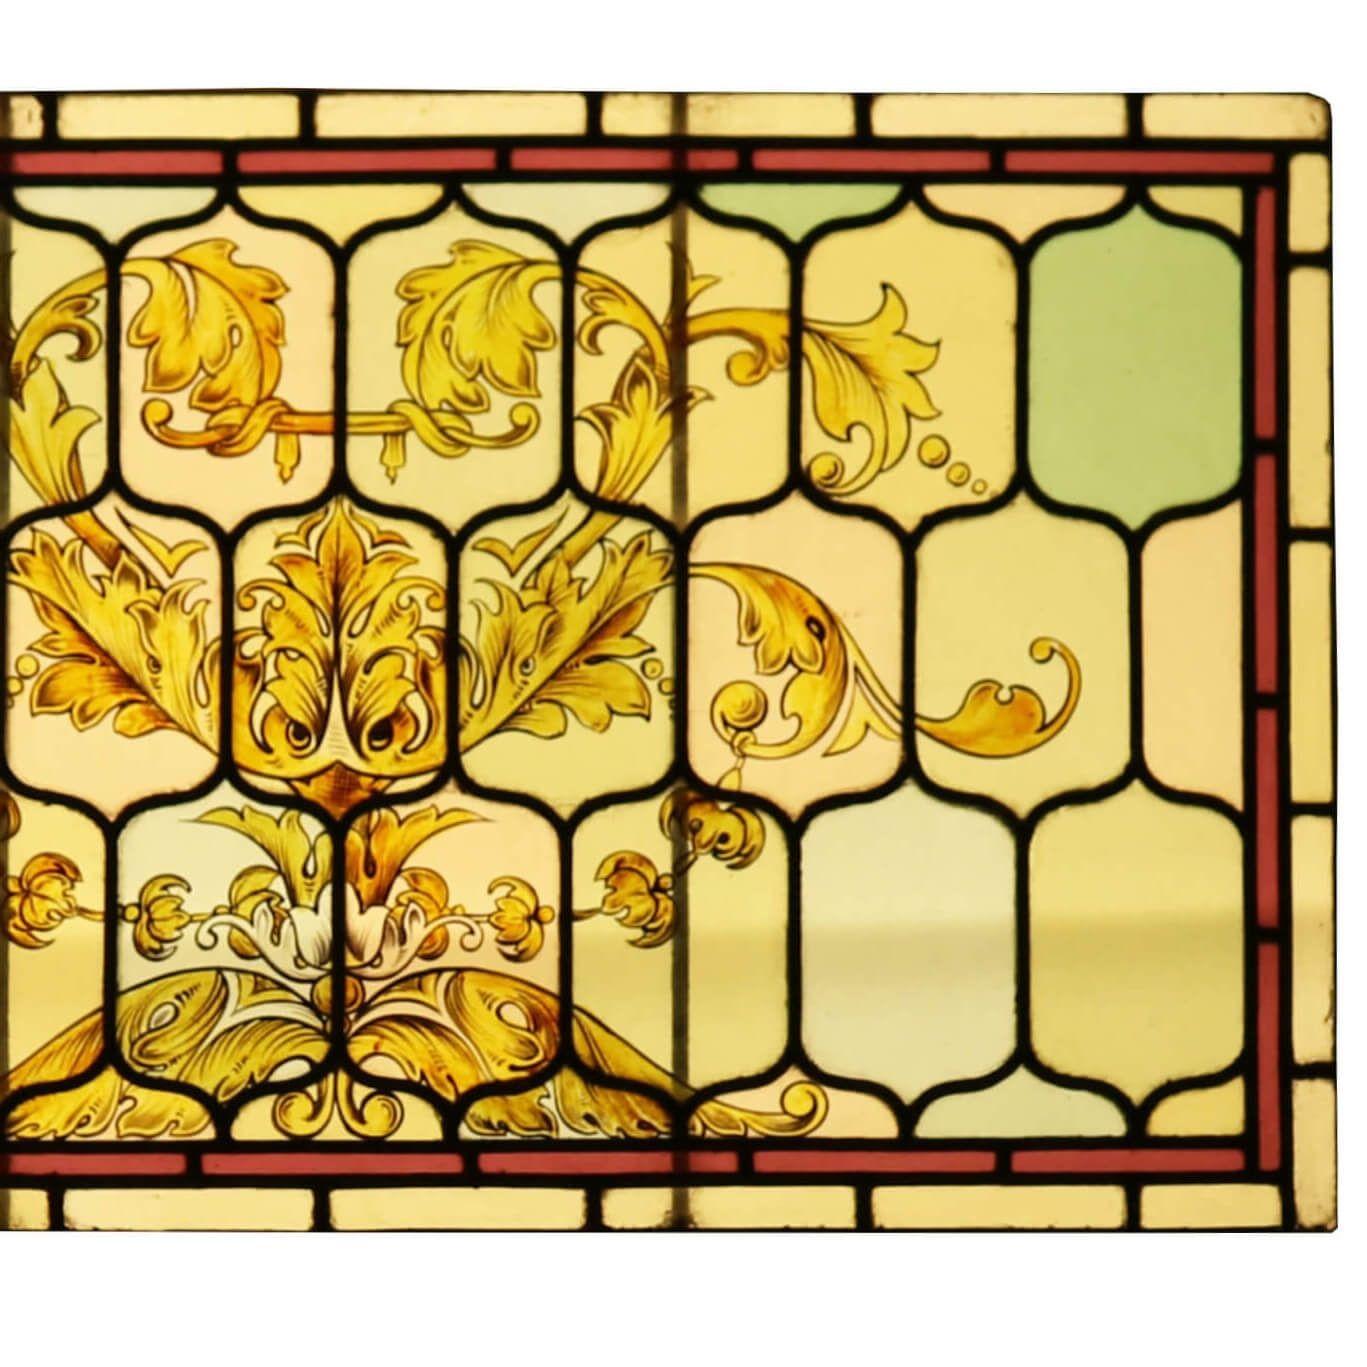 A beautifully hand painted antique stained glass panel in the Victorian style with a detailed floral design. We have another panel almost identical.

At over 130 years old, this beautiful stained glass panel is in good structural condition. There